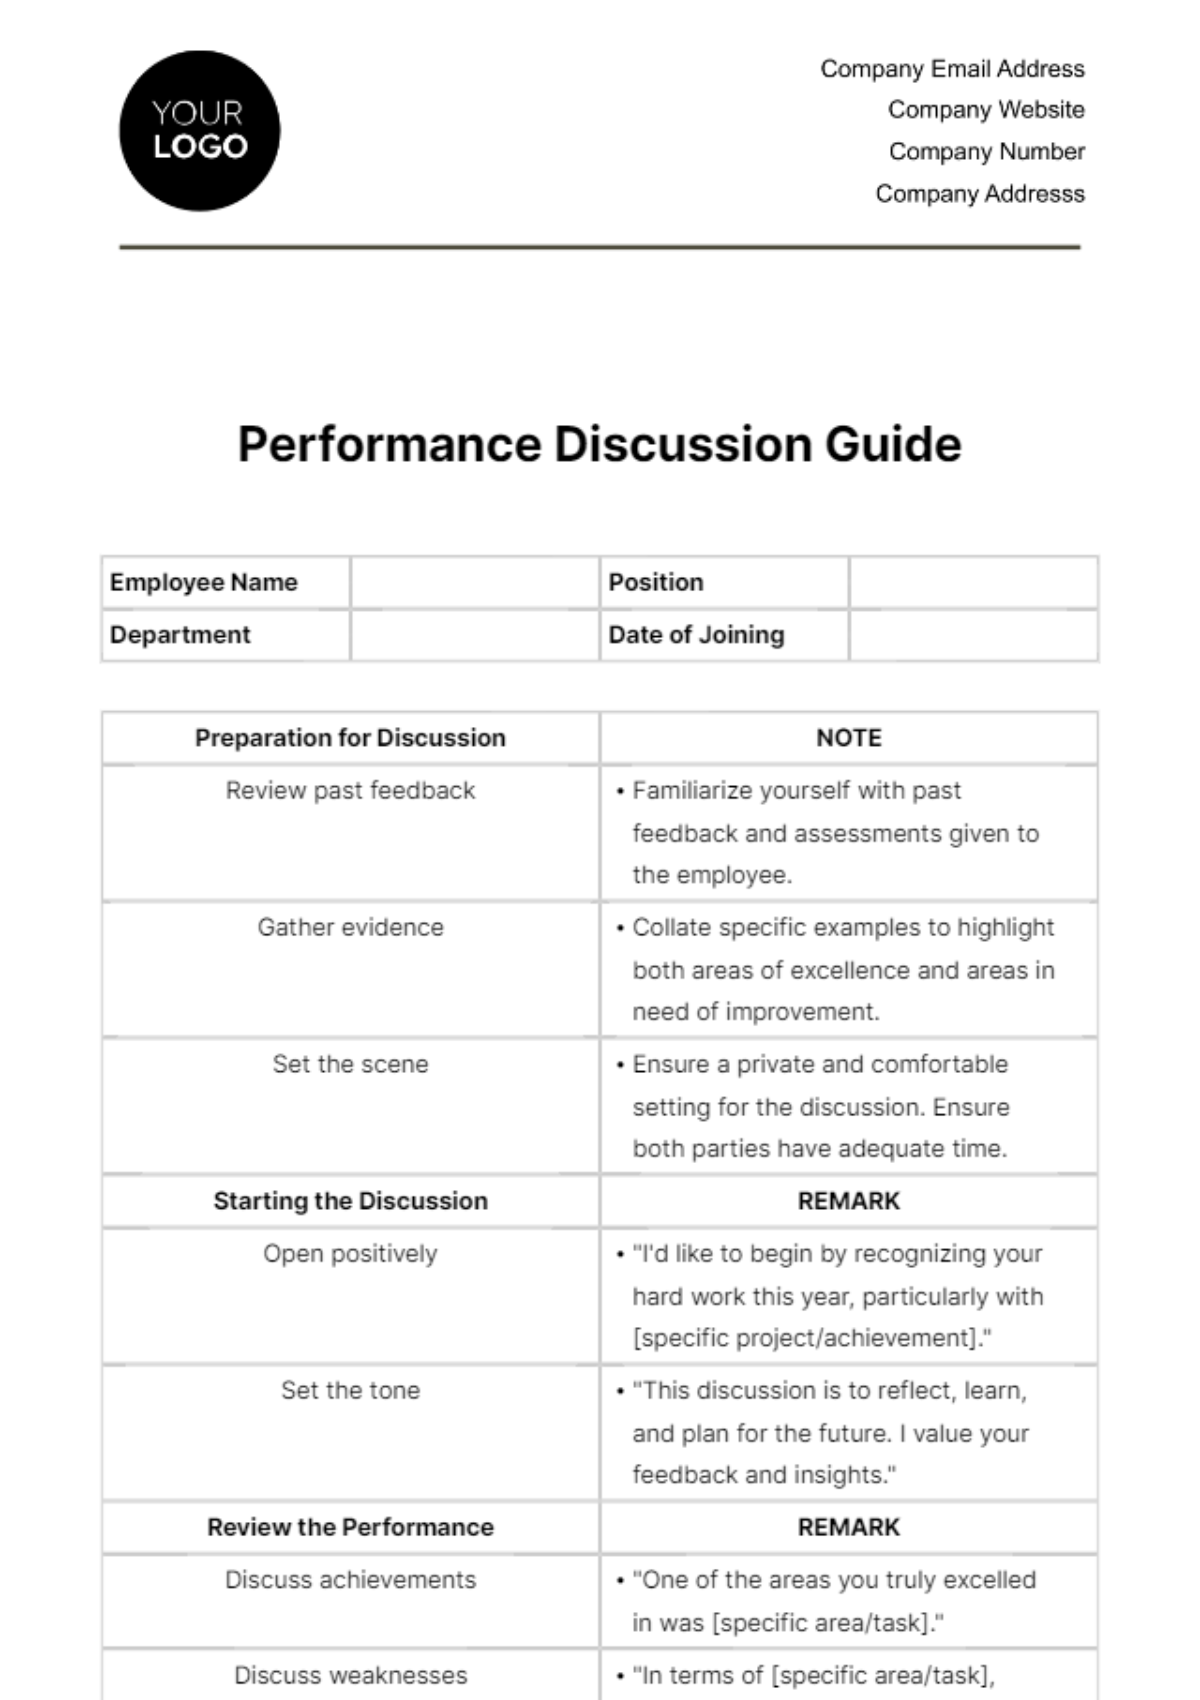 Free Performance Discussion Guide HR Template